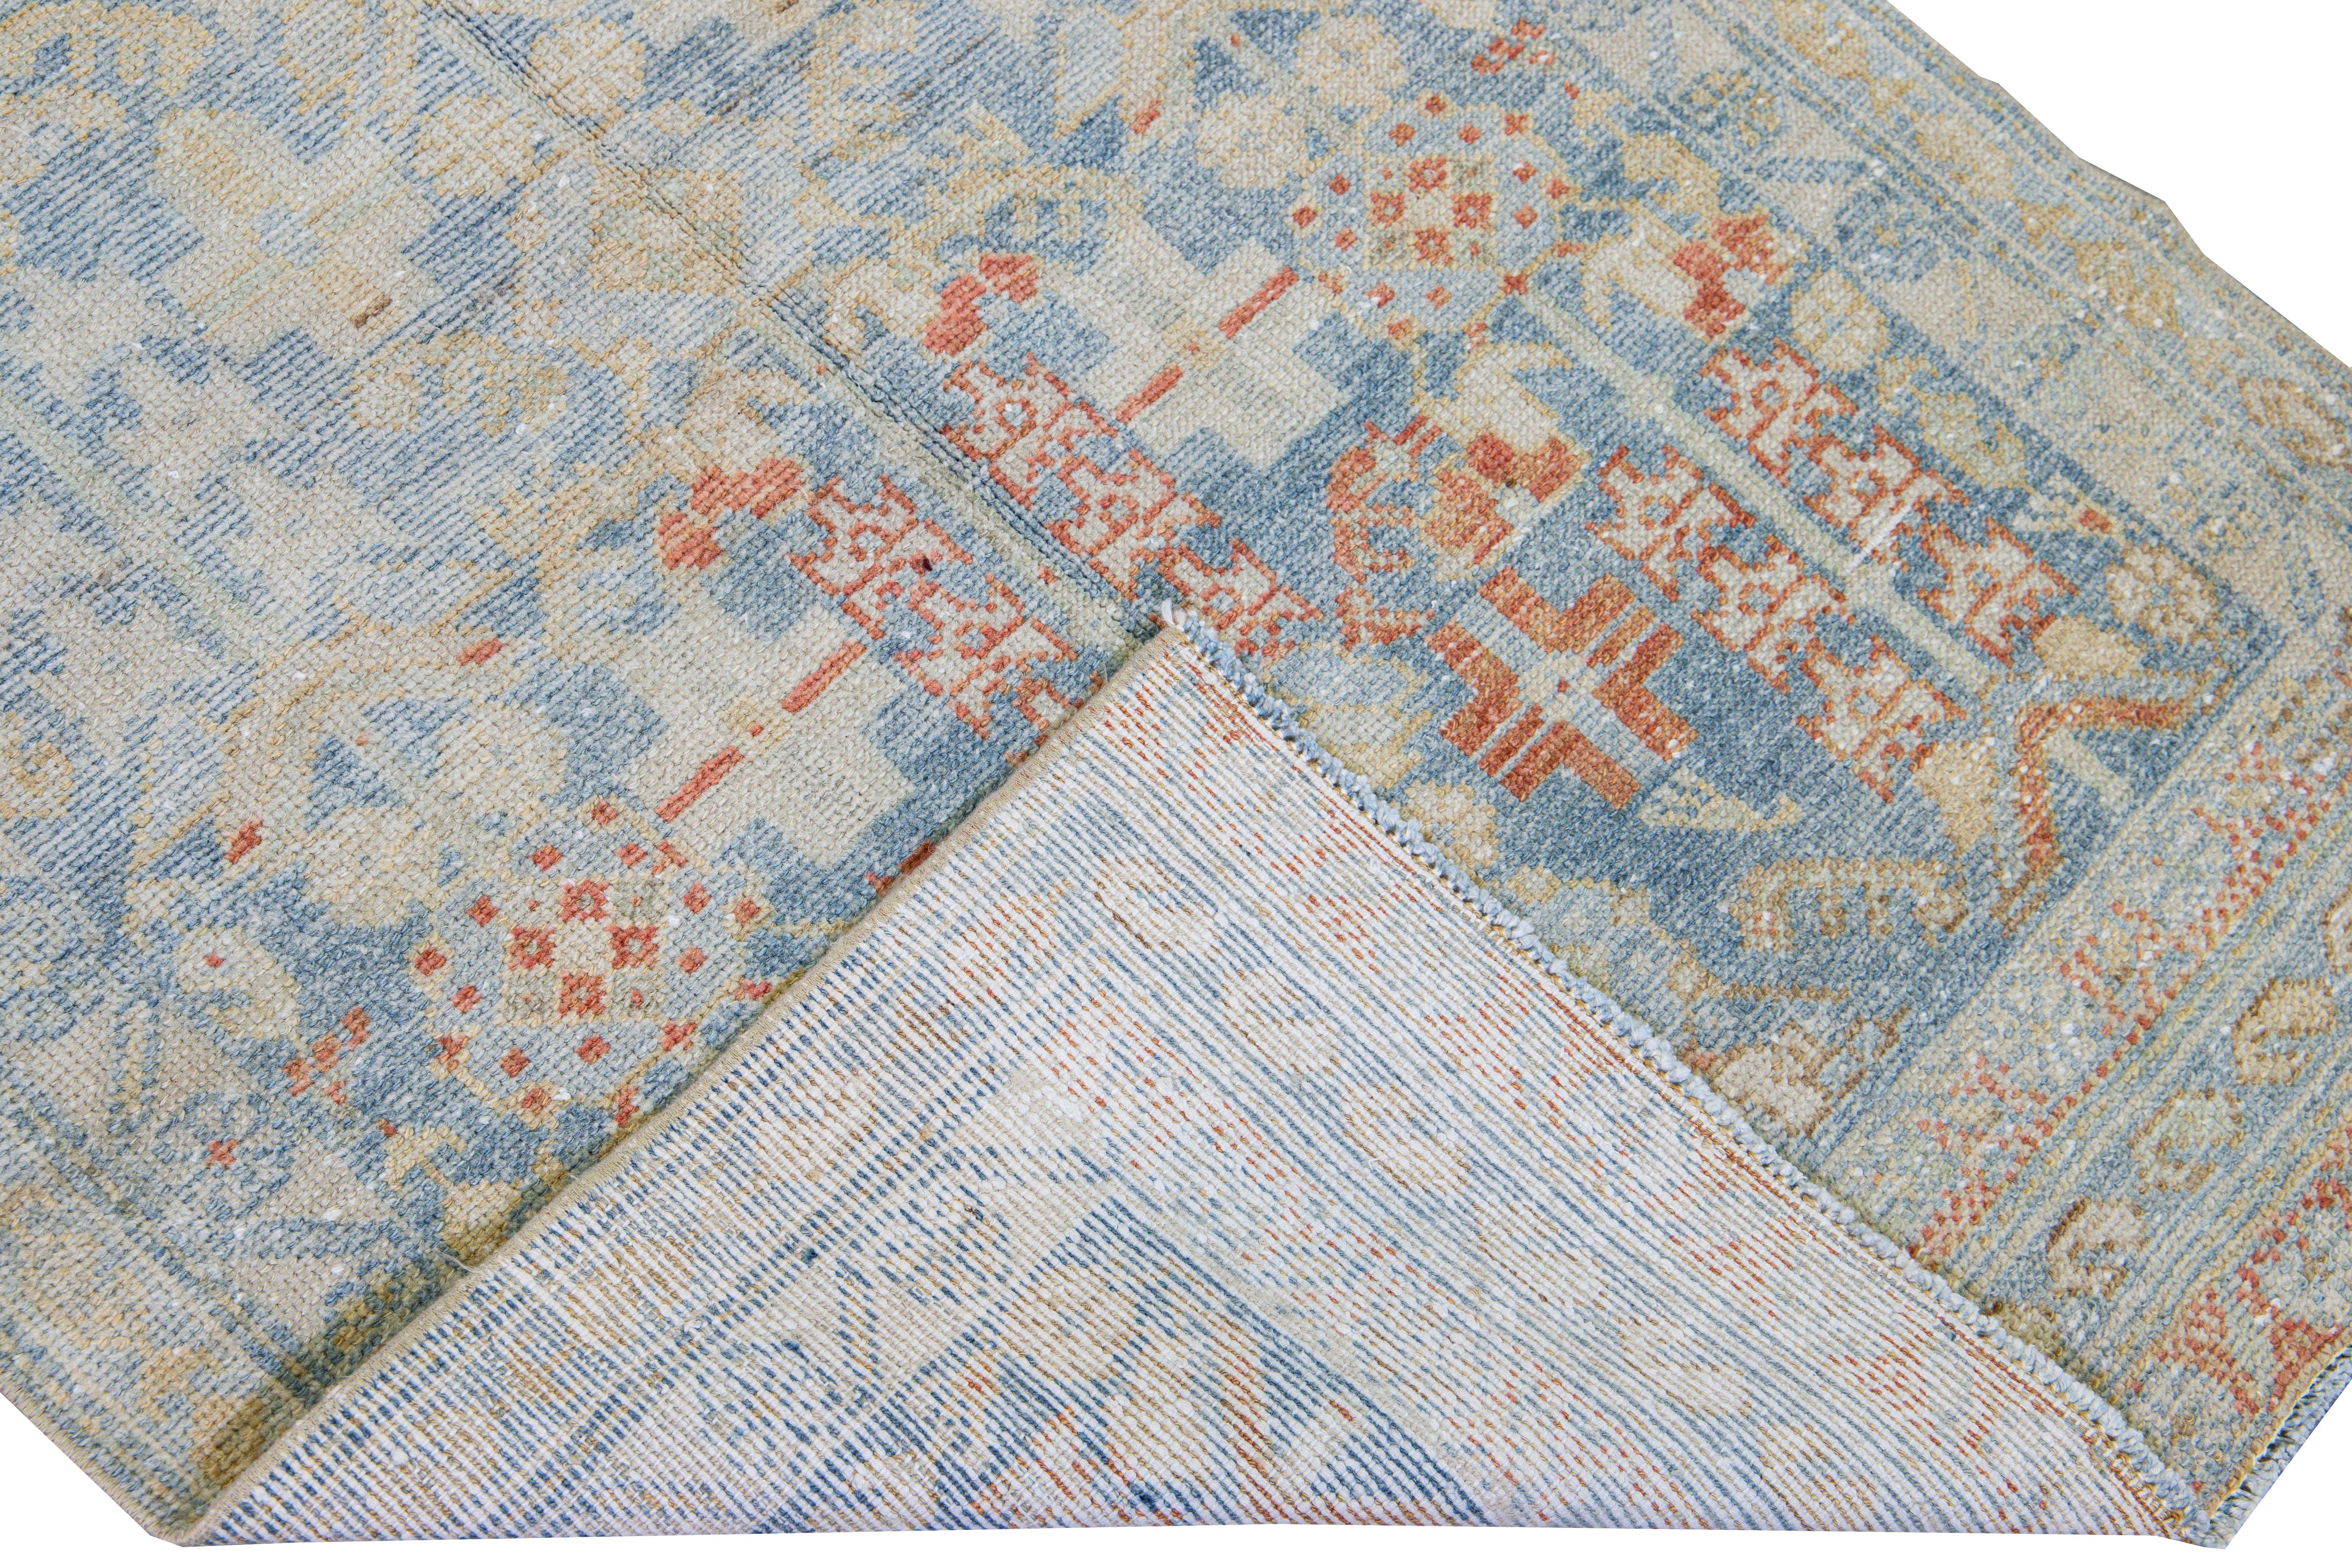 Beautiful vintage Malayer hand-knotted wool runner with a blue field. This Malayer rug has a beige frame and accents of rust in an all-over gorgeous geometric medallion floral pattern design.

This rug measures: 3' x 13'1